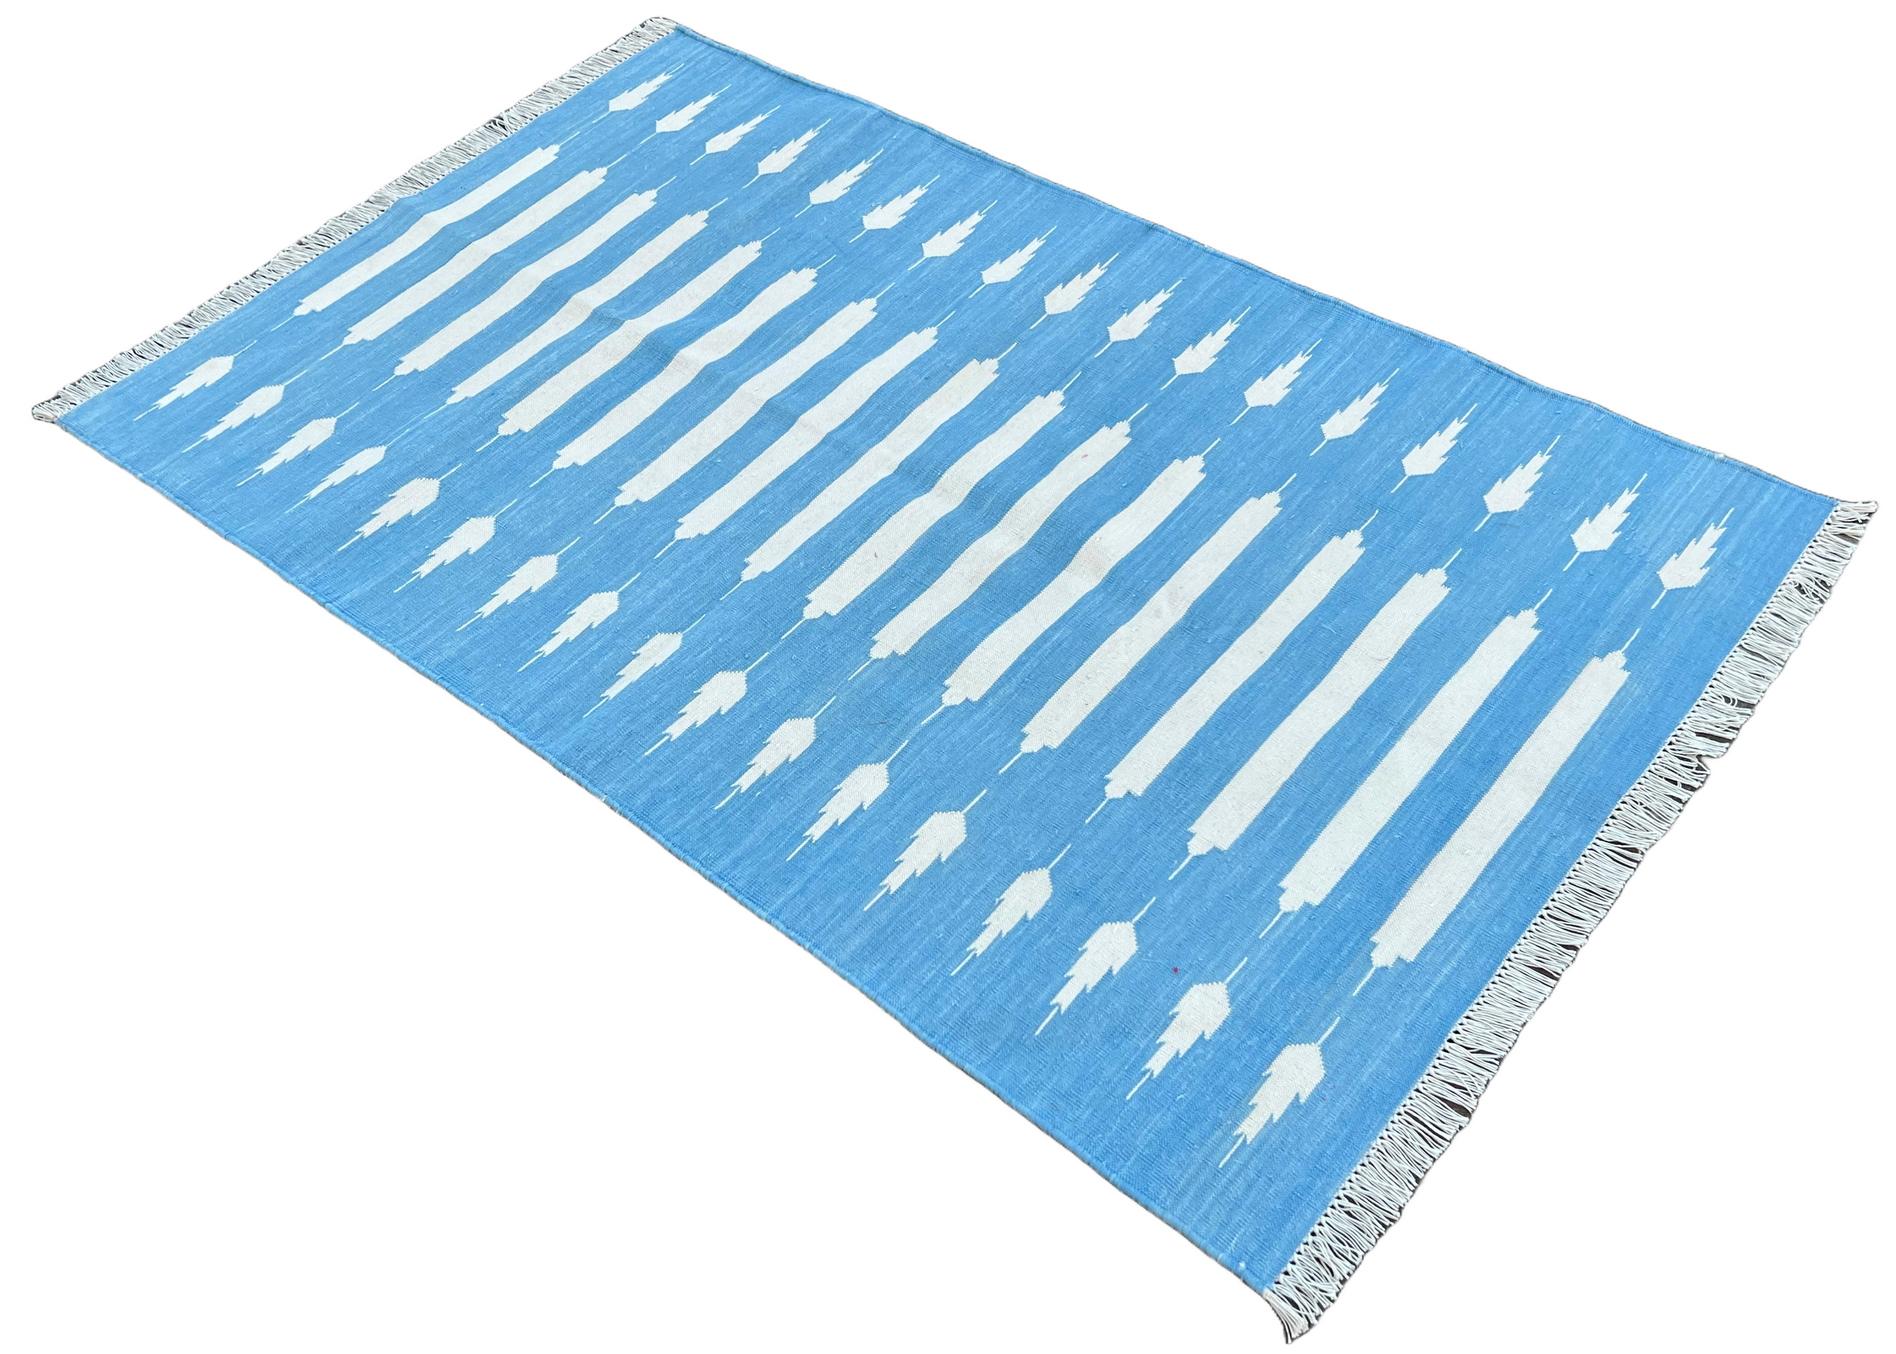 Cotton Vegetable Dyed Blue And White Striped Indian Dhurrie Rug-3'x5' 
These special flat-weave dhurries are hand-woven with 15 ply 100% cotton yarn. Due to the special manufacturing techniques used to create our rugs, the size and color of each